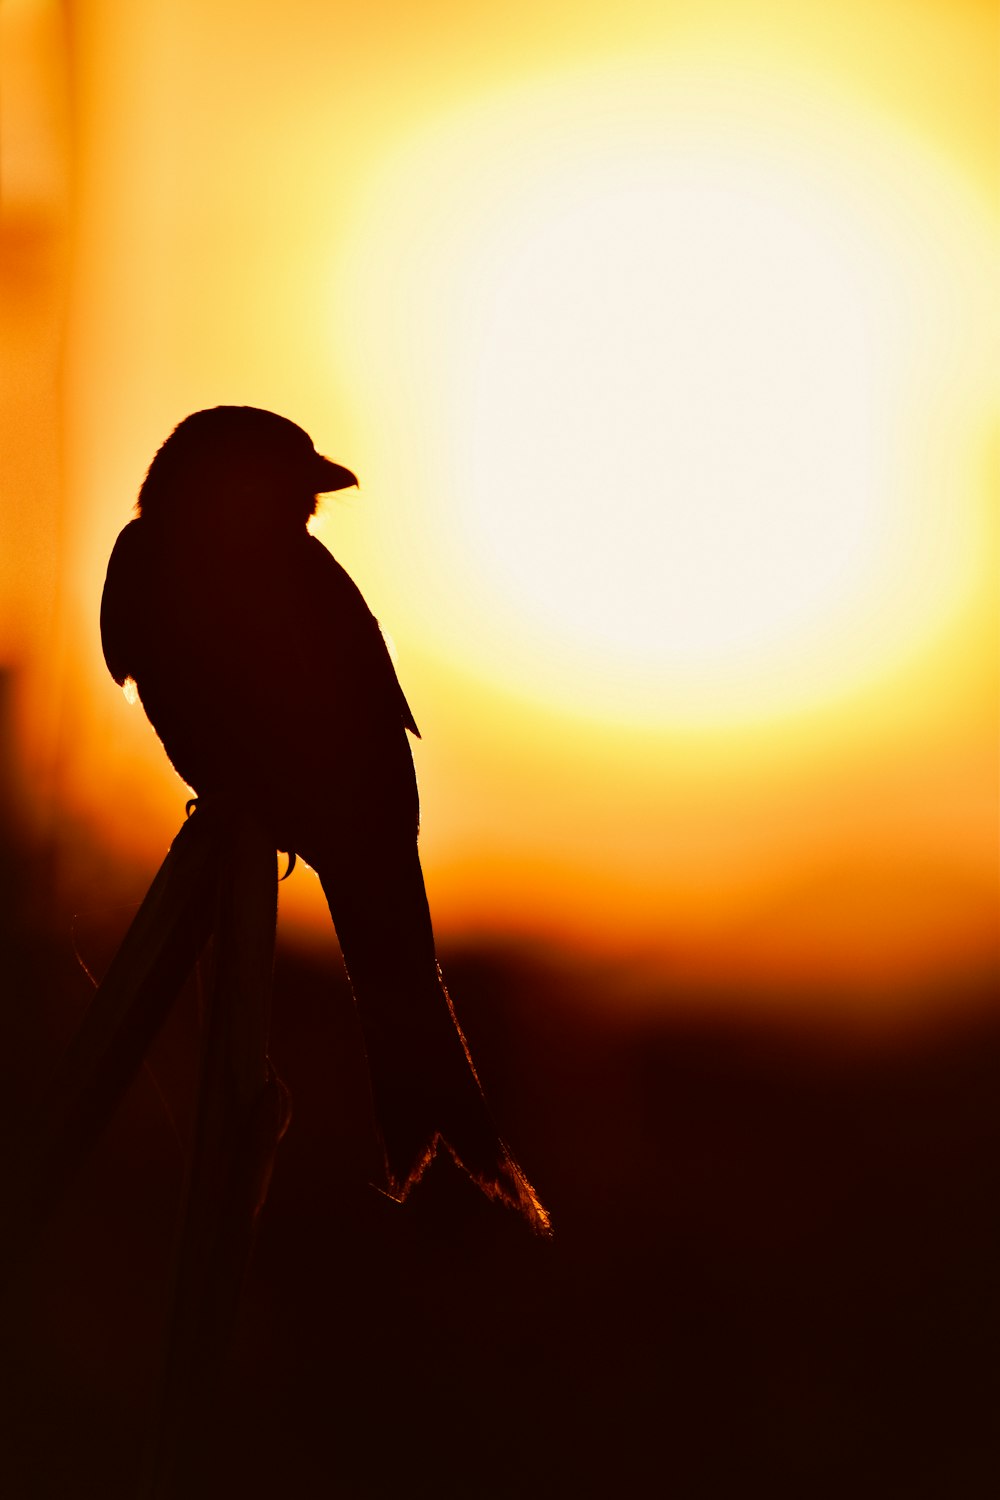 a black bird sitting on top of a wooden stick